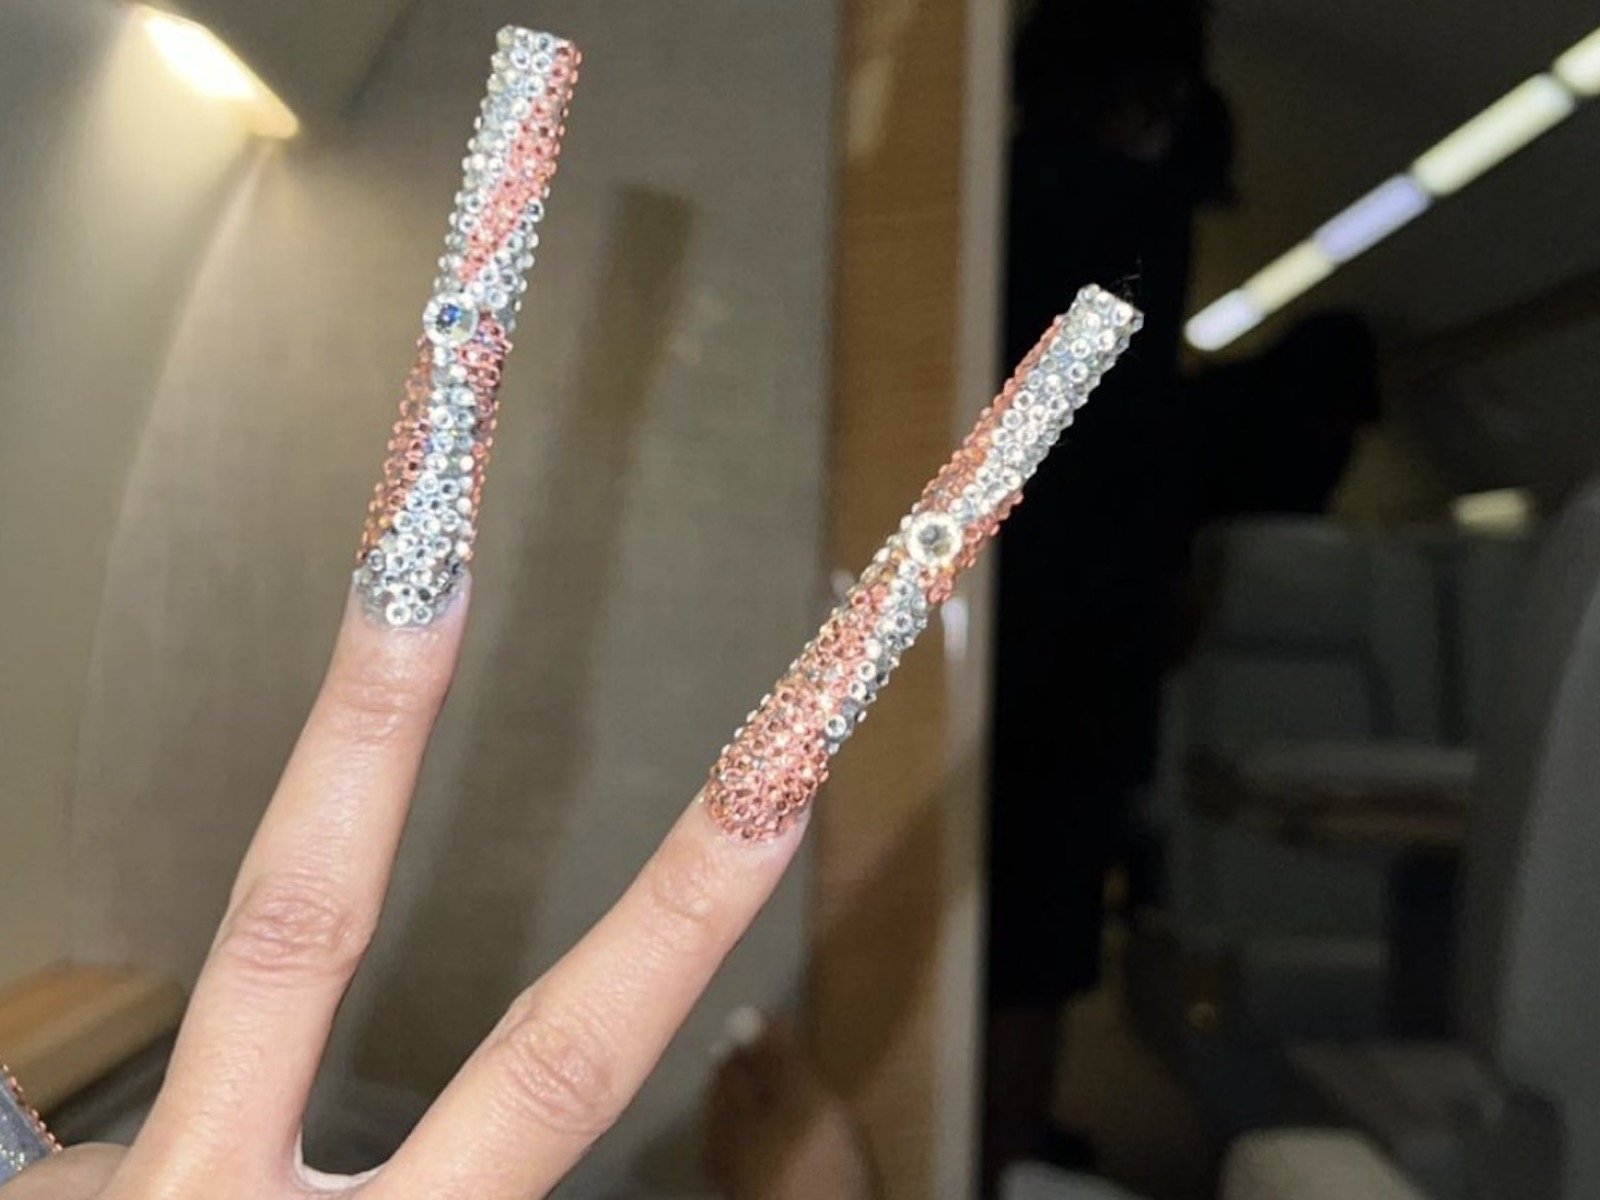 Cardi B Nails✨'s Instagram post: “Cardi's new set of nails 😍 (Nails done  by Jenny💅🏽) - - Follow @cardibnai… | Cardi b nails, Bling acrylic nails,  How to do nails